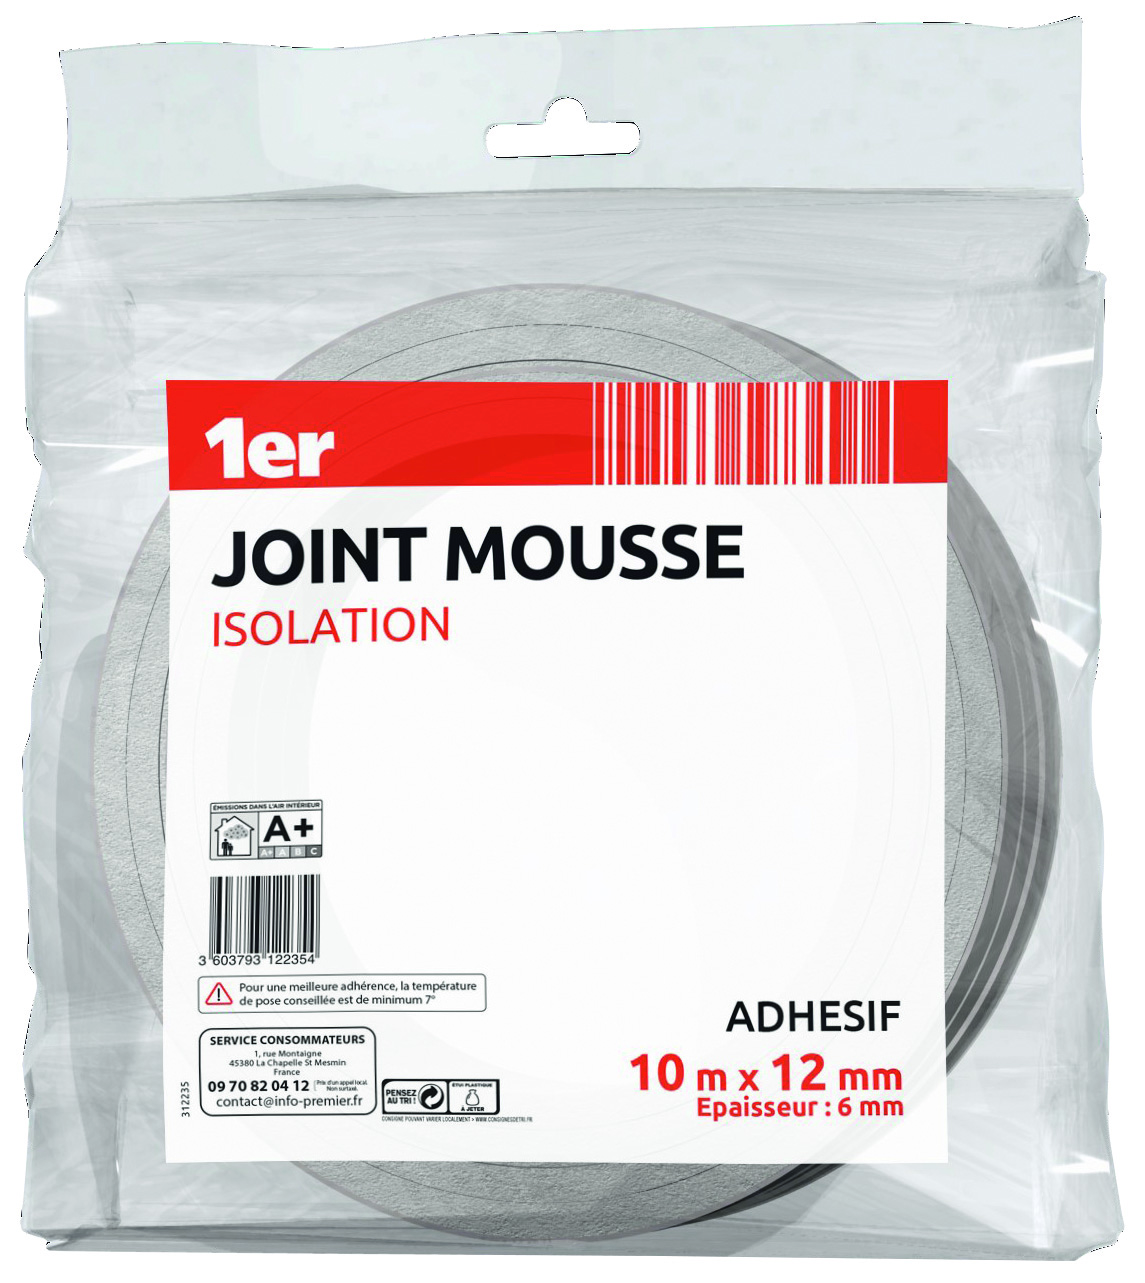 Joint mousse isolation 10m x 12mm blanc - 1ER